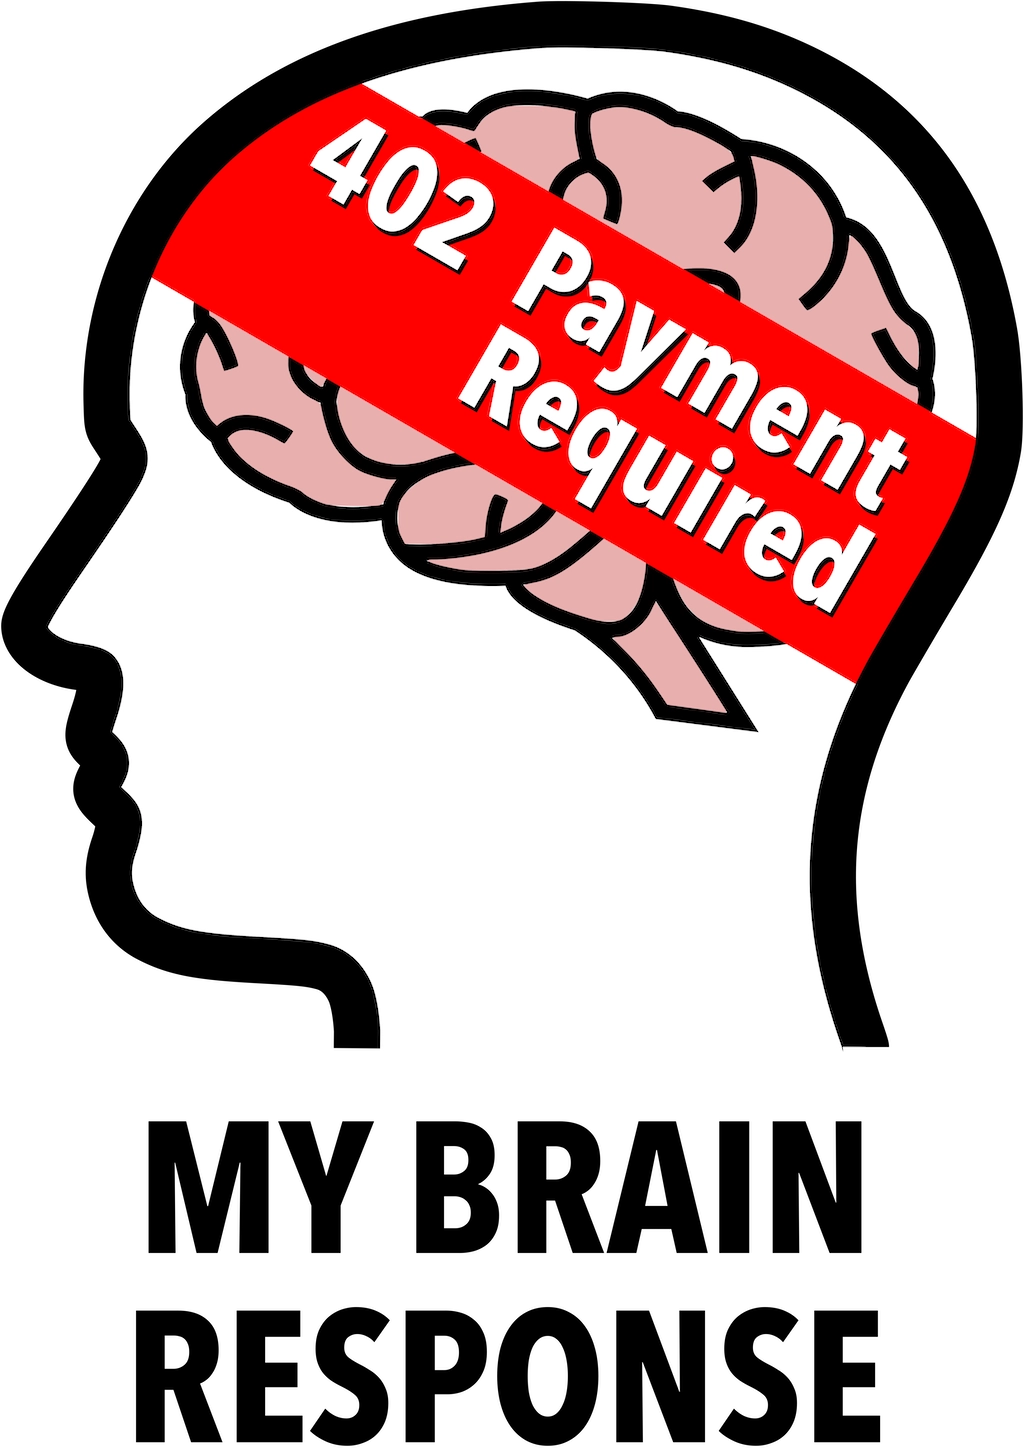 My Brain Response: 402 Payment Required